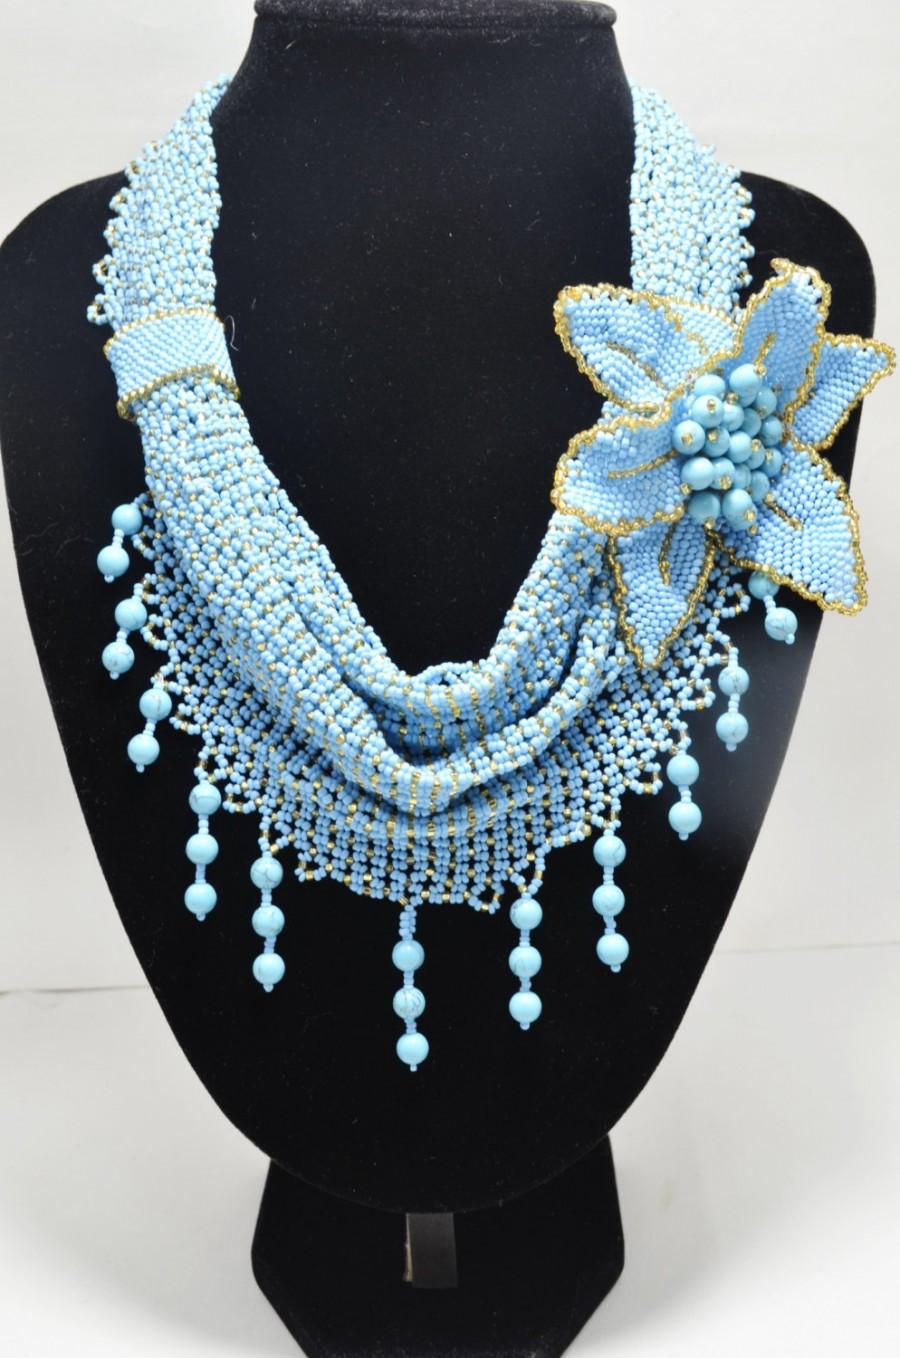 Hochzeit - Turquoise Statement Beaded Scarf Necklace with Flower Brooch, Beading Holiday Necklace, Fashion Seed Bead Jewelry, Christmas Gift for Her